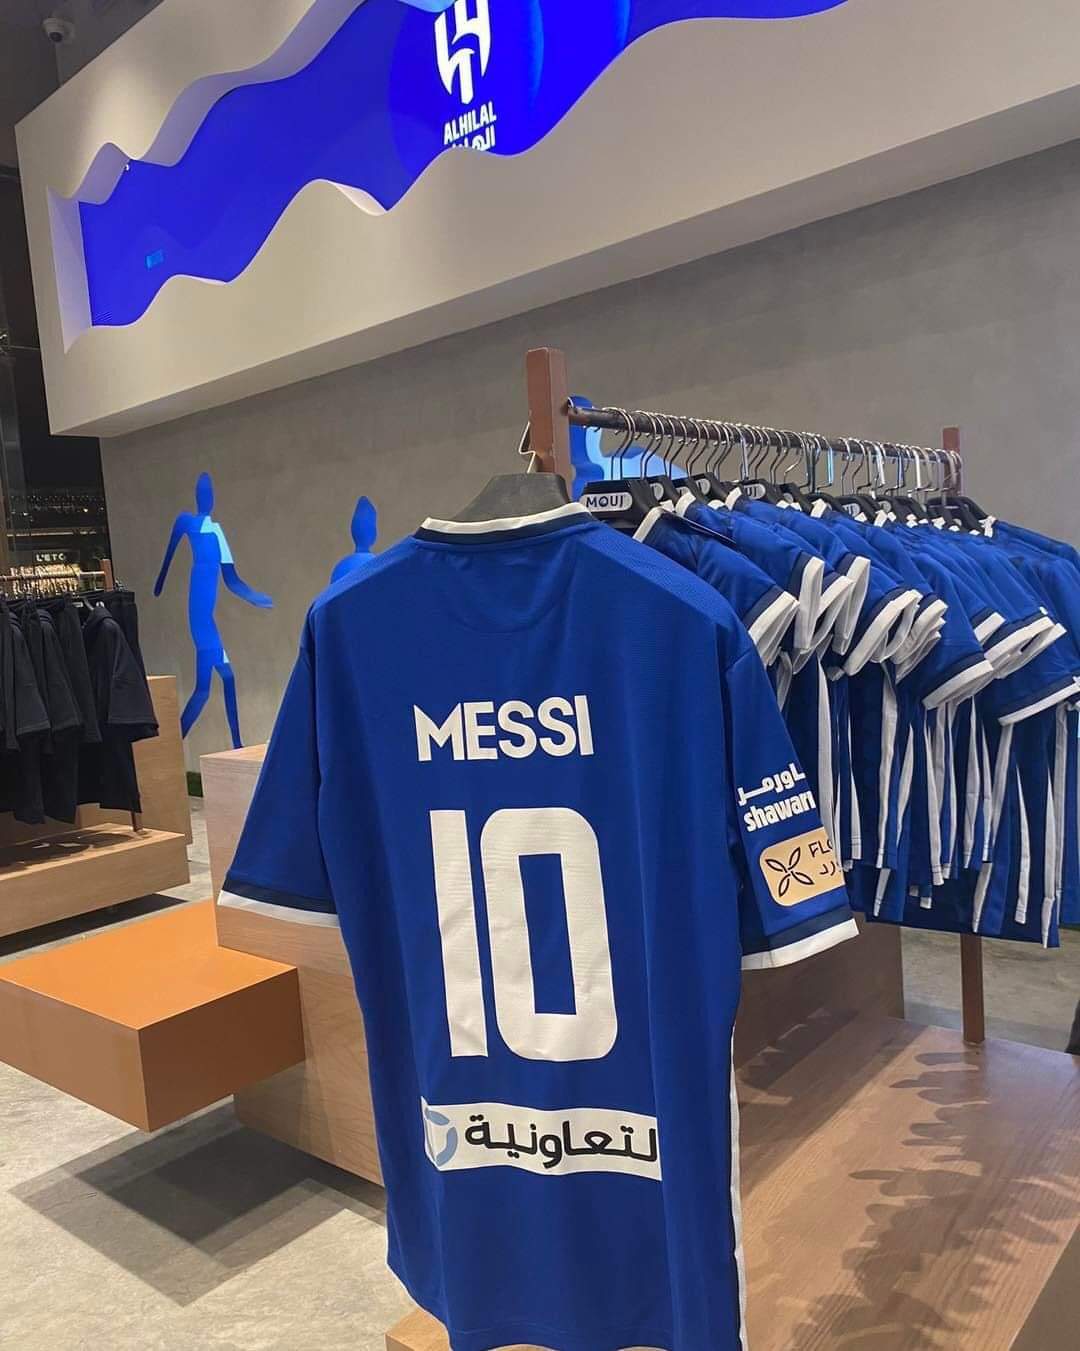 Ráfs  on Twitter: "🚨 Lionel Messi's shirt at Al Hilal's official store are the biggest rival Al Nassr in Saudi Arabia. 👀🧐 https://t.co/fpDMpJMDLS" / X